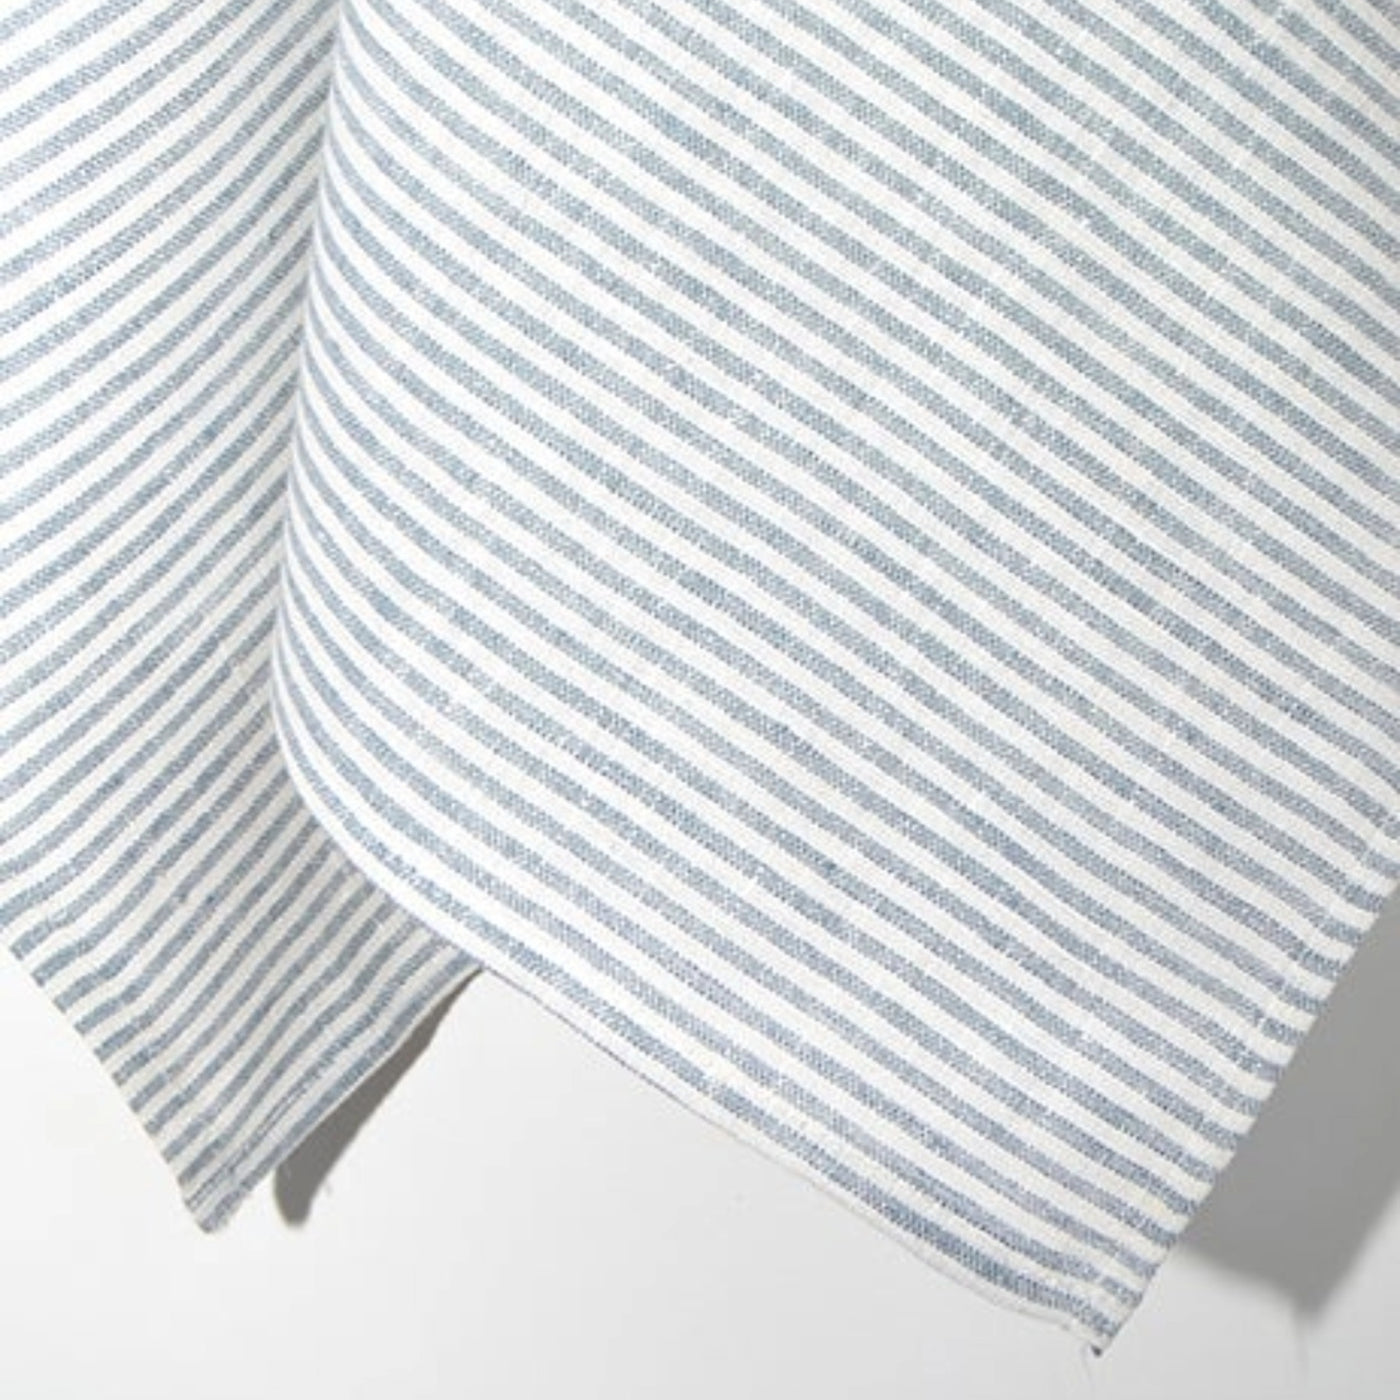 French Striped Linen Tea Towel - closeup of navy blue stipes on off-white towel